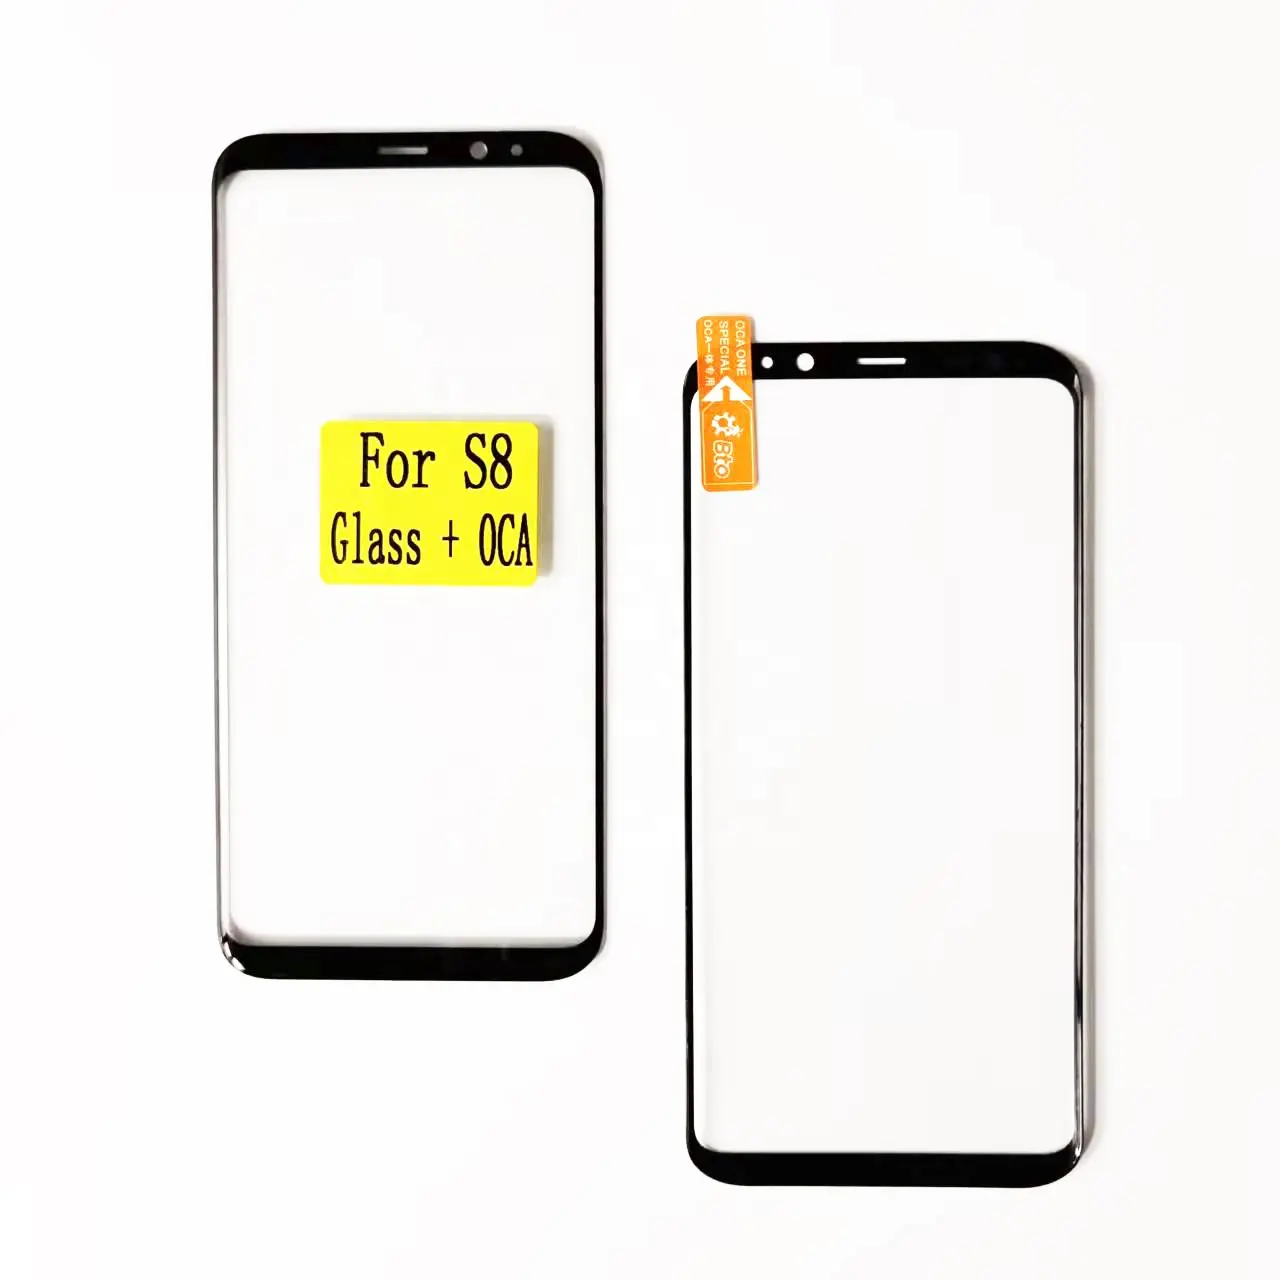 KULI factory OEM original touch edge curved screen panel replacement For Samsung S8 plus S8+ front glass cover lens with oca